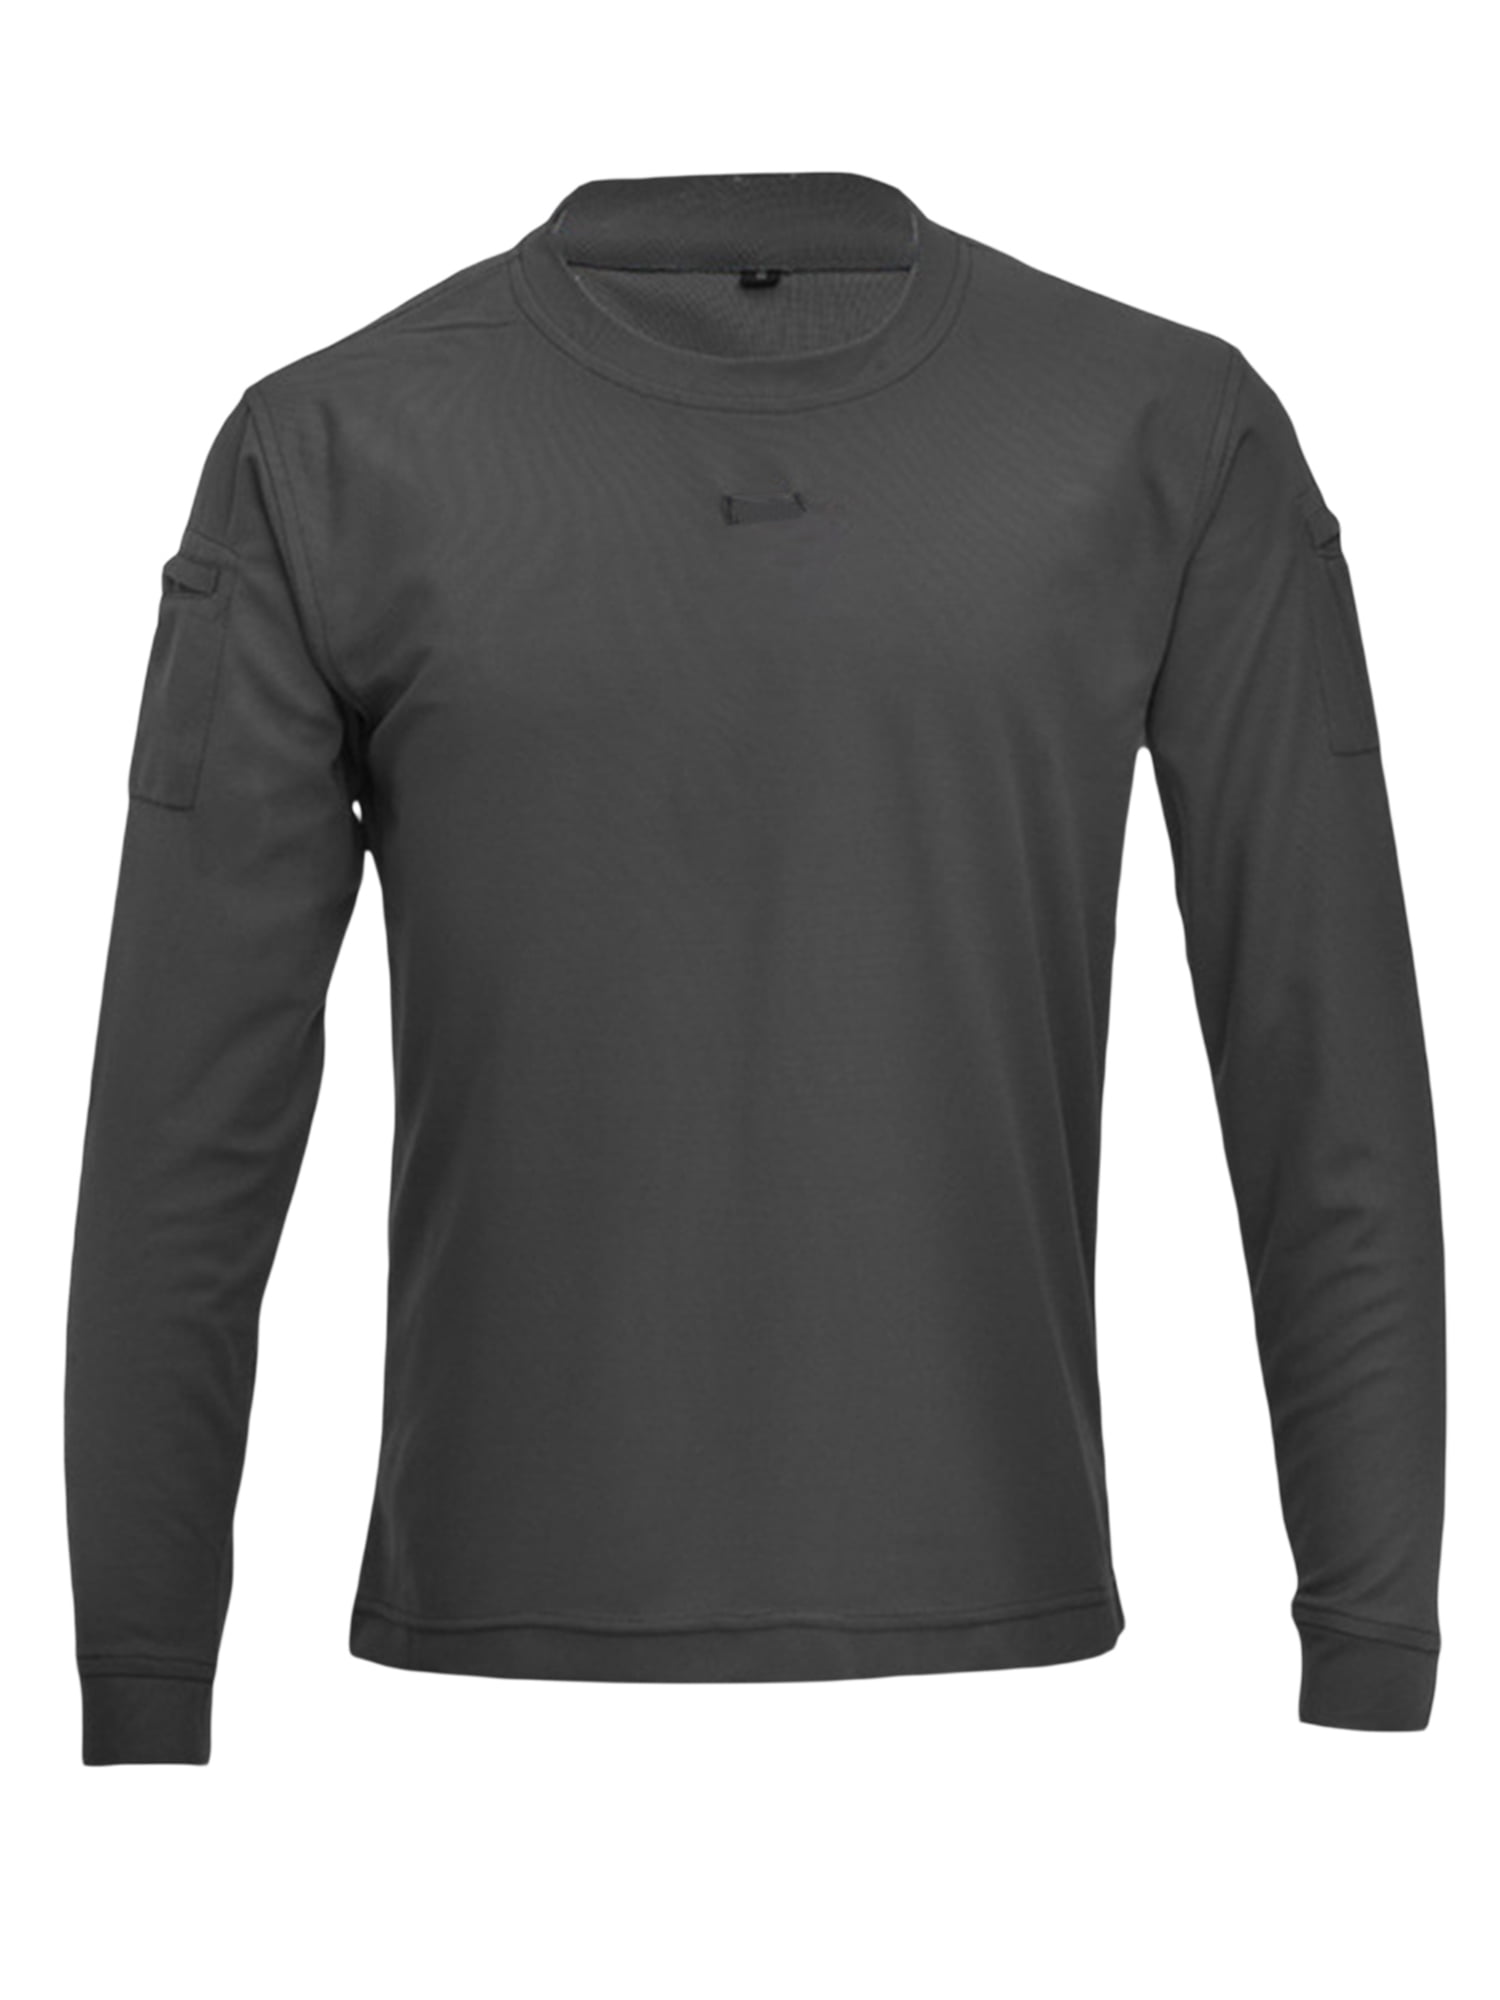 Pudcoco Men's Tactical Long Sleeve T-Shirts for Combat and Athletics ...